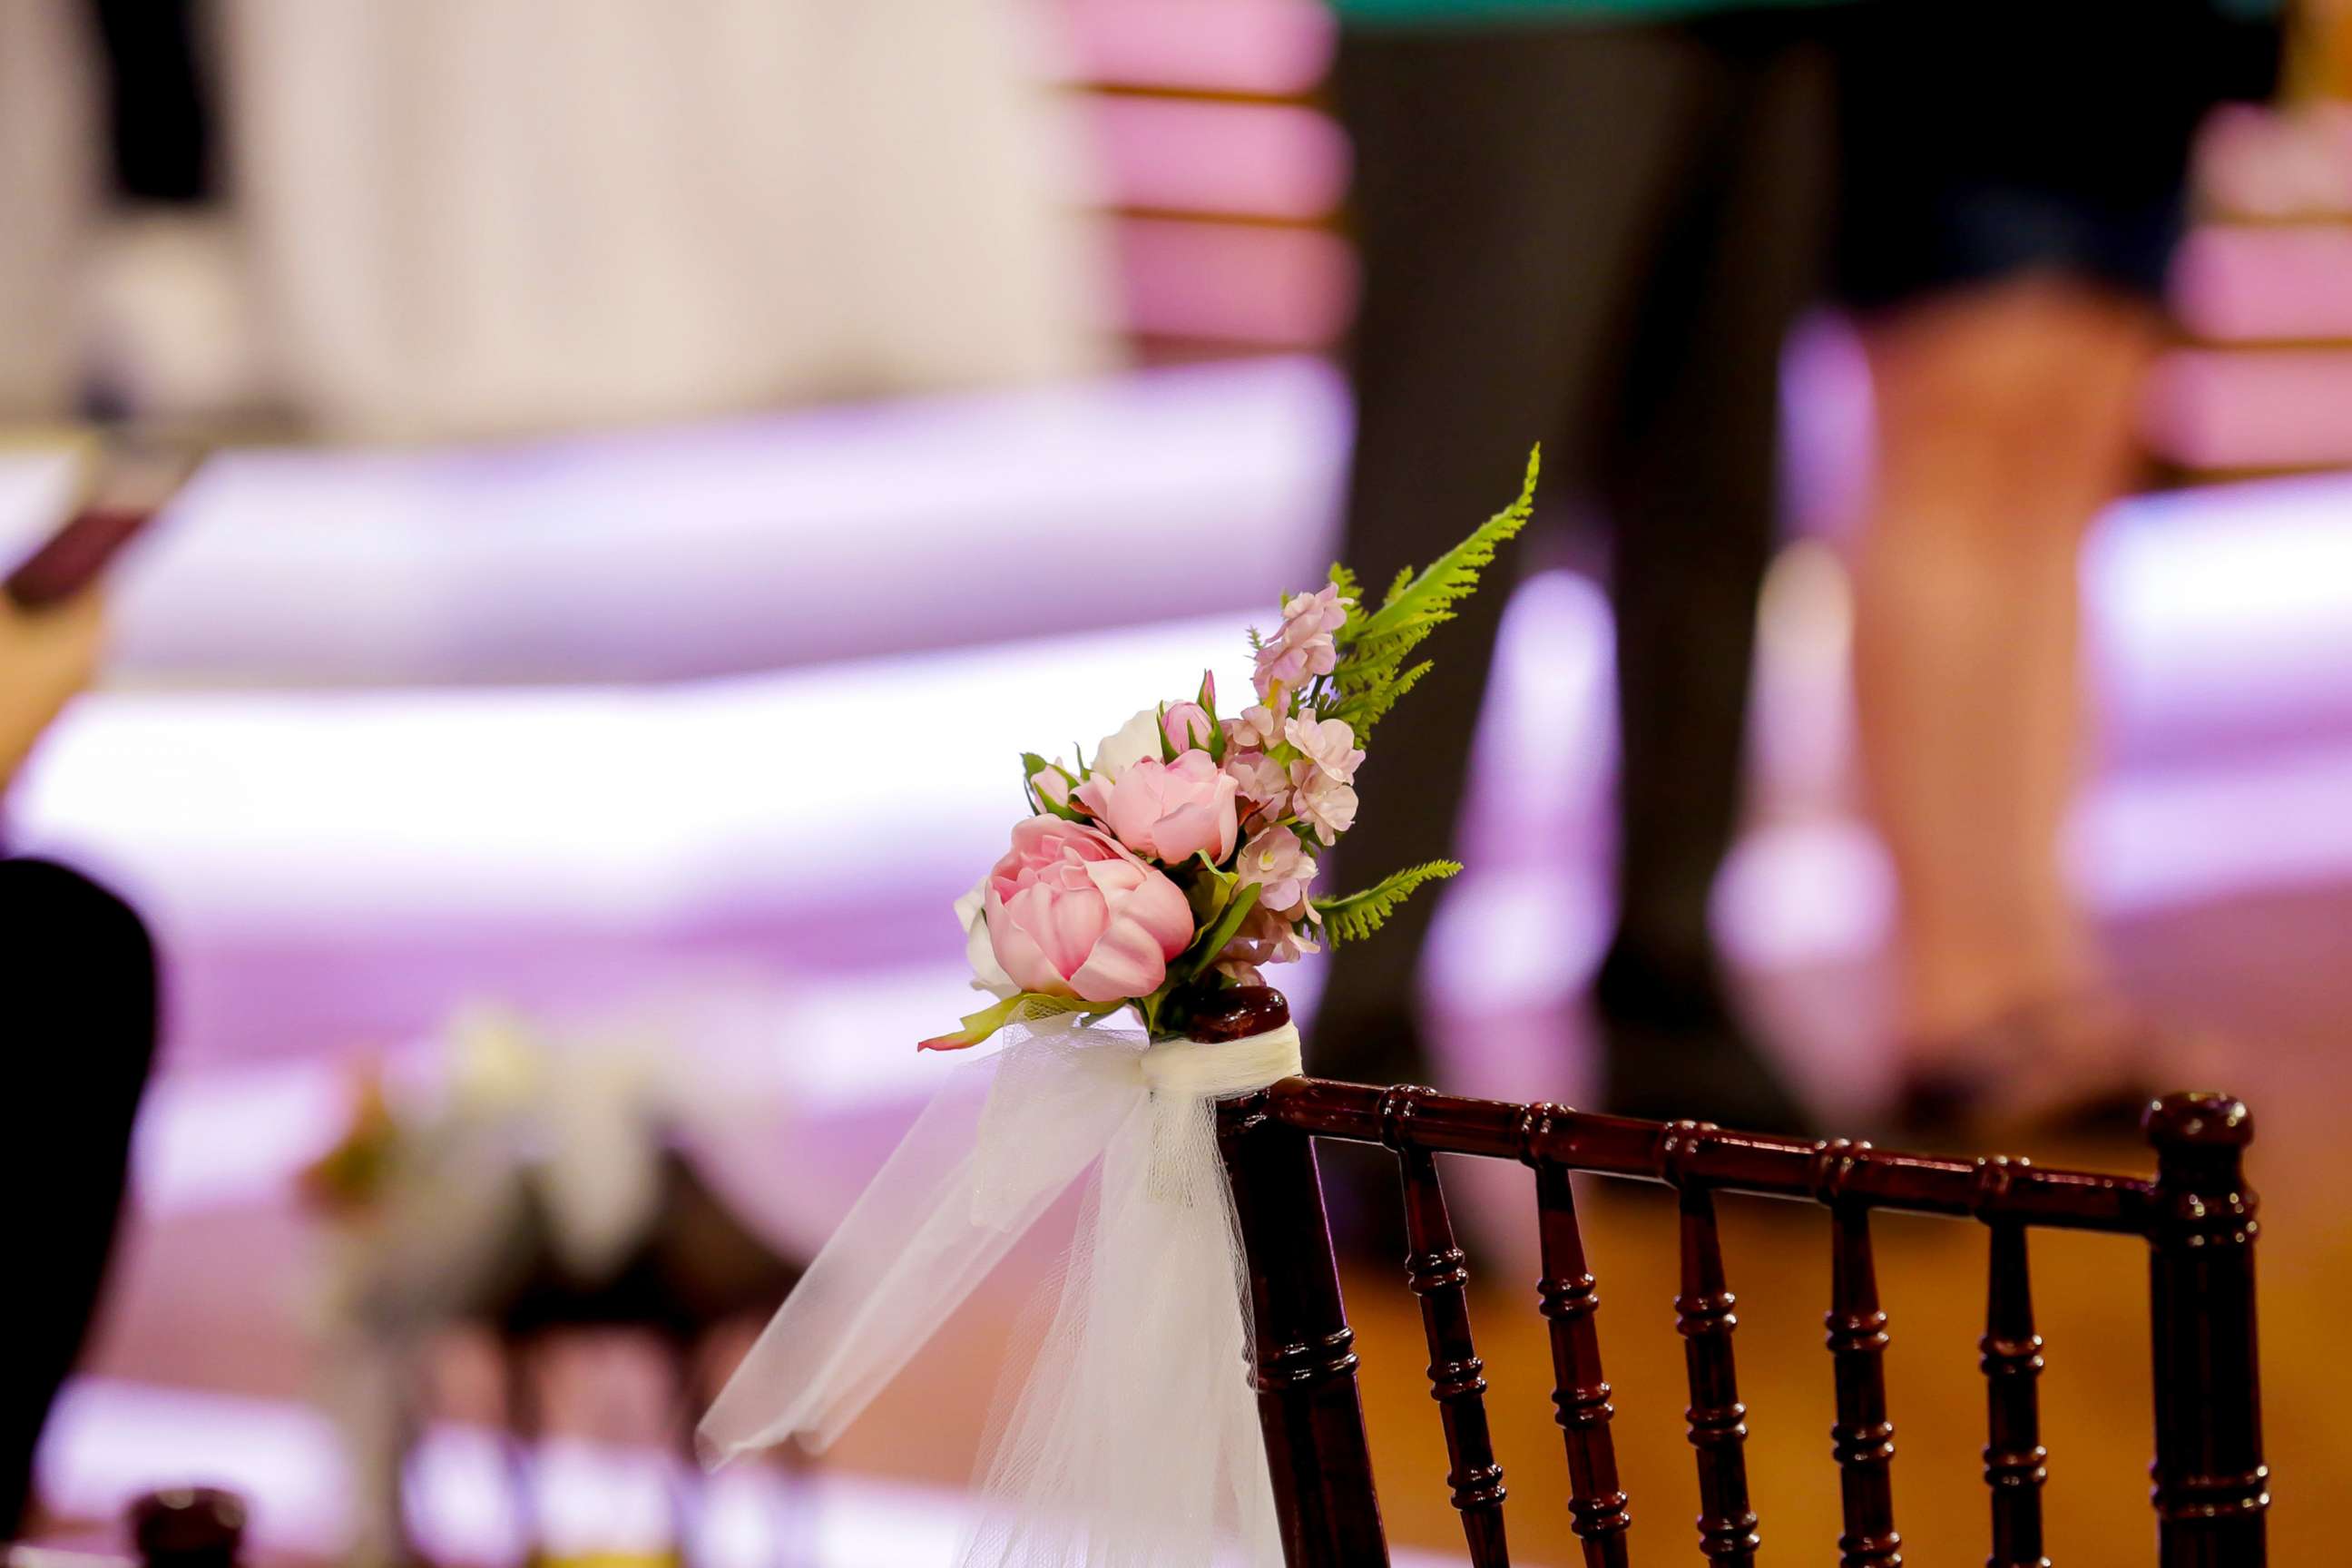 PHOTO: Chairs are decorated with flowers and tulle